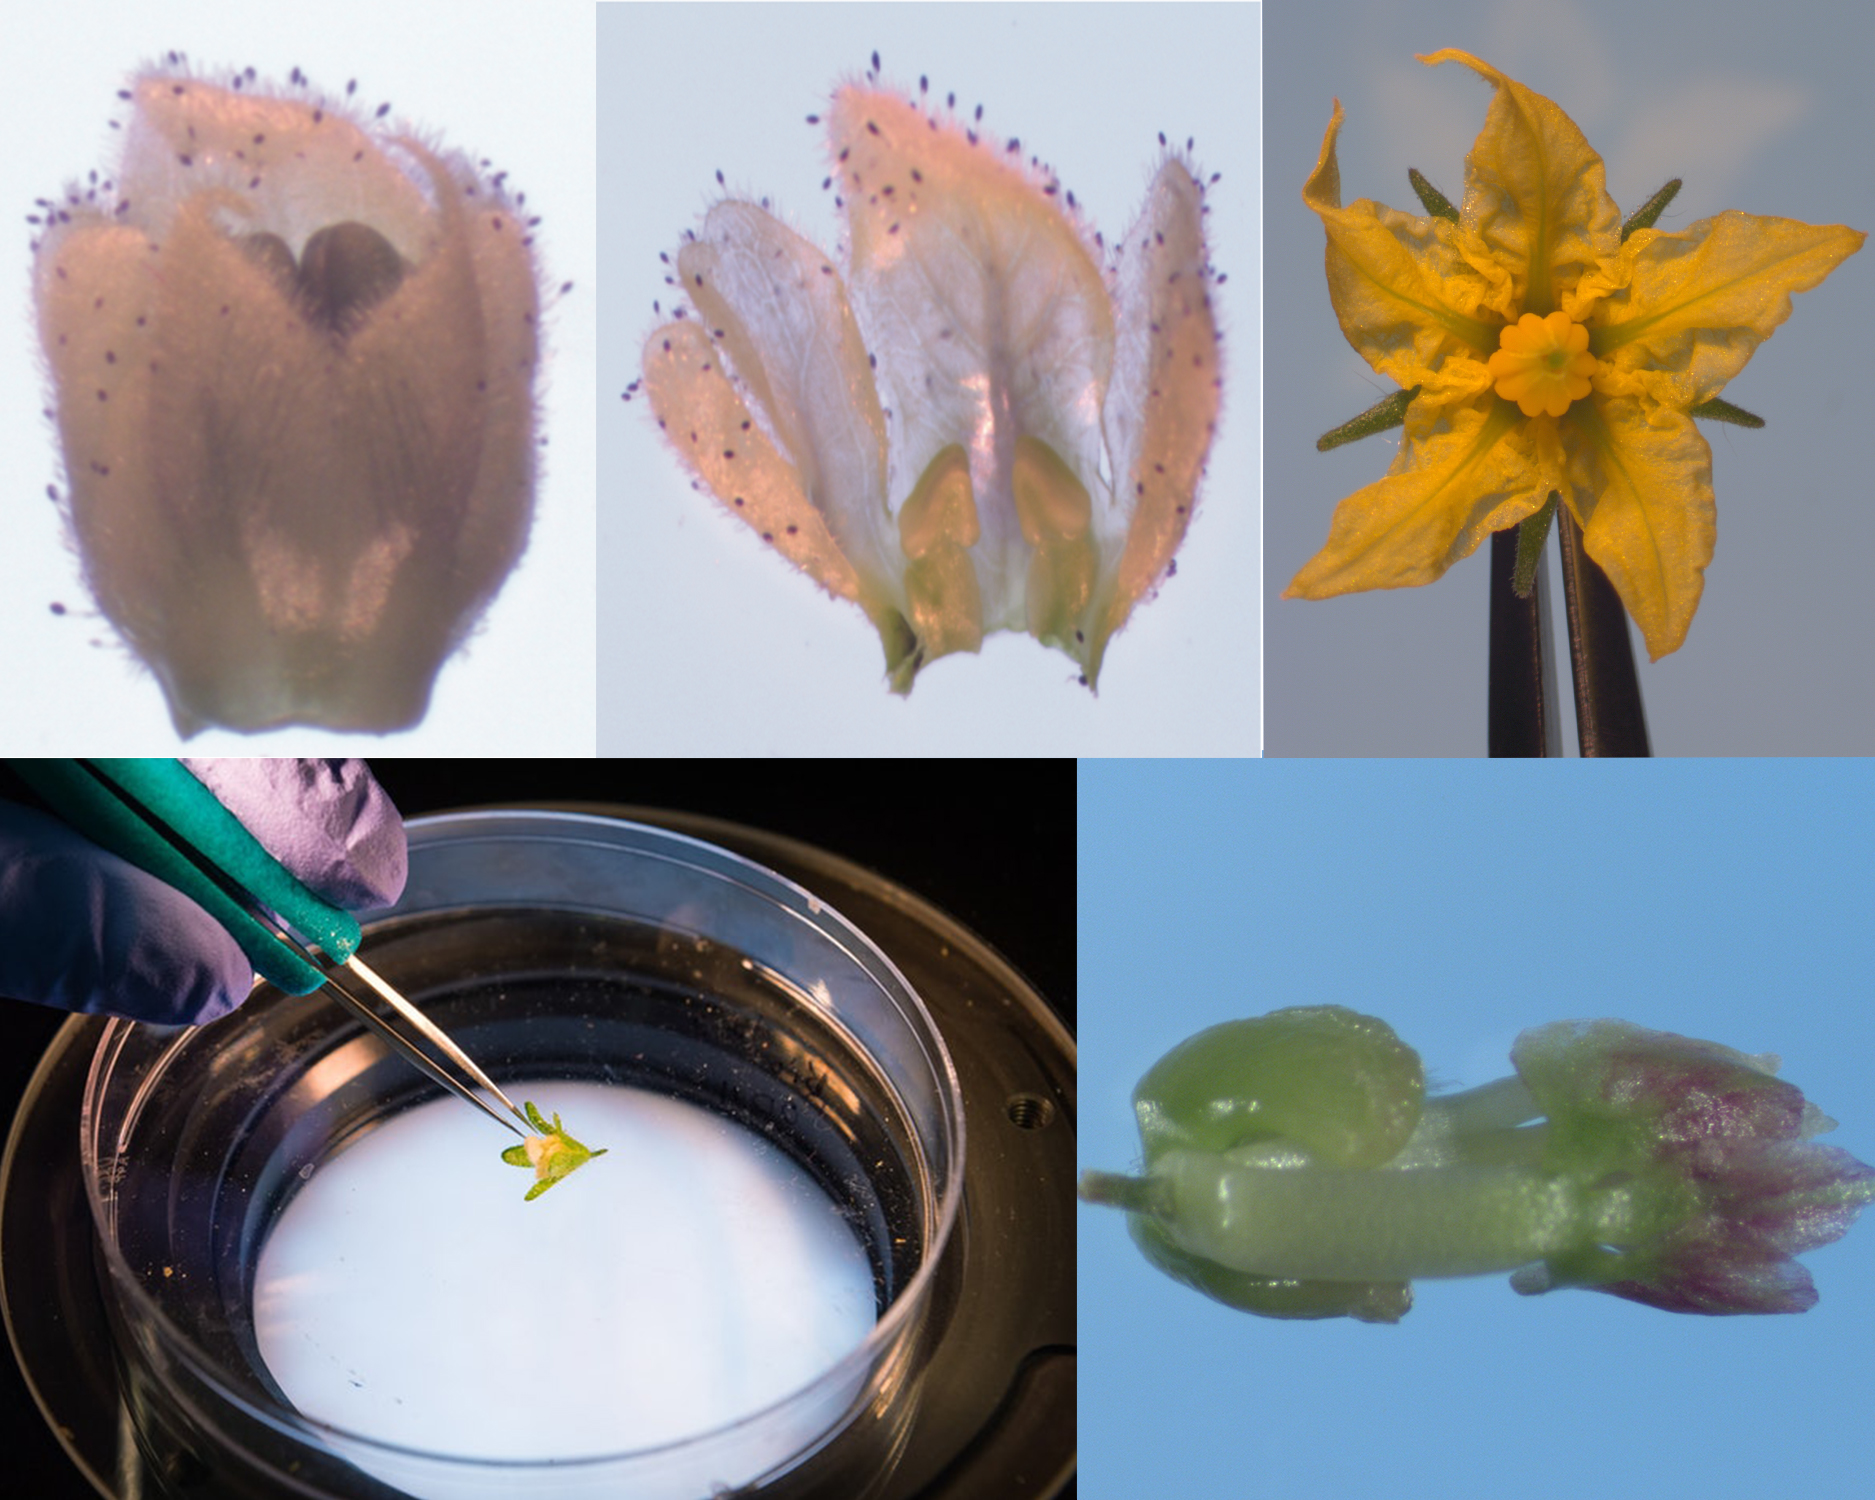 Dissection of flowers under microscopy